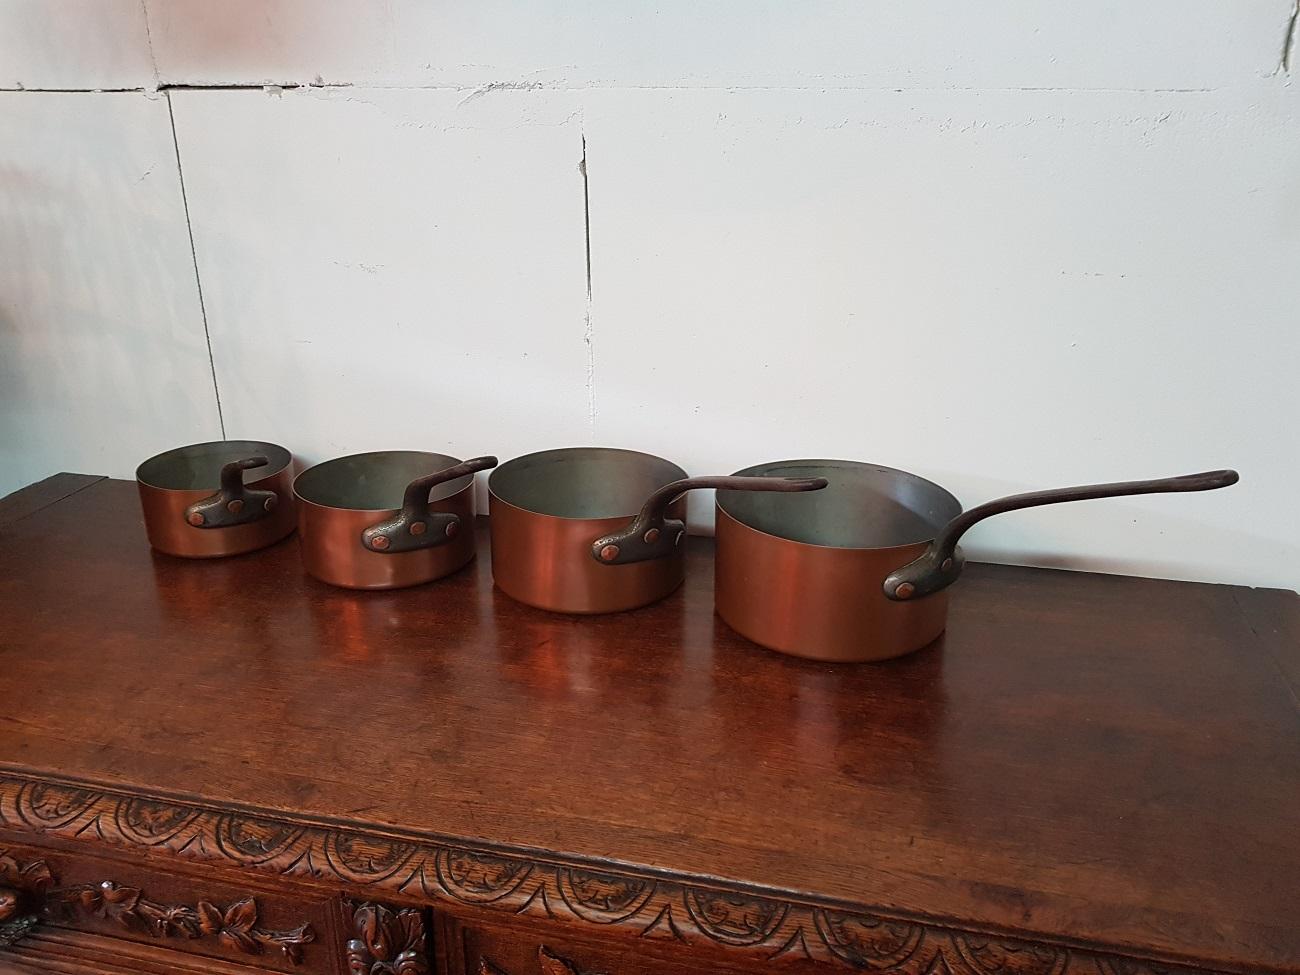 A beautiful and decorative second half of the 20th century 4-piece Vintage French copper cookware set with tinned interior and iron handles.

The measurements are,
Depth 14-20 cm/ 5.5-7.8 inch.
Width 14-20 cm/ 5.5-7.8 inch.
Height 7.5-10.5 cm/